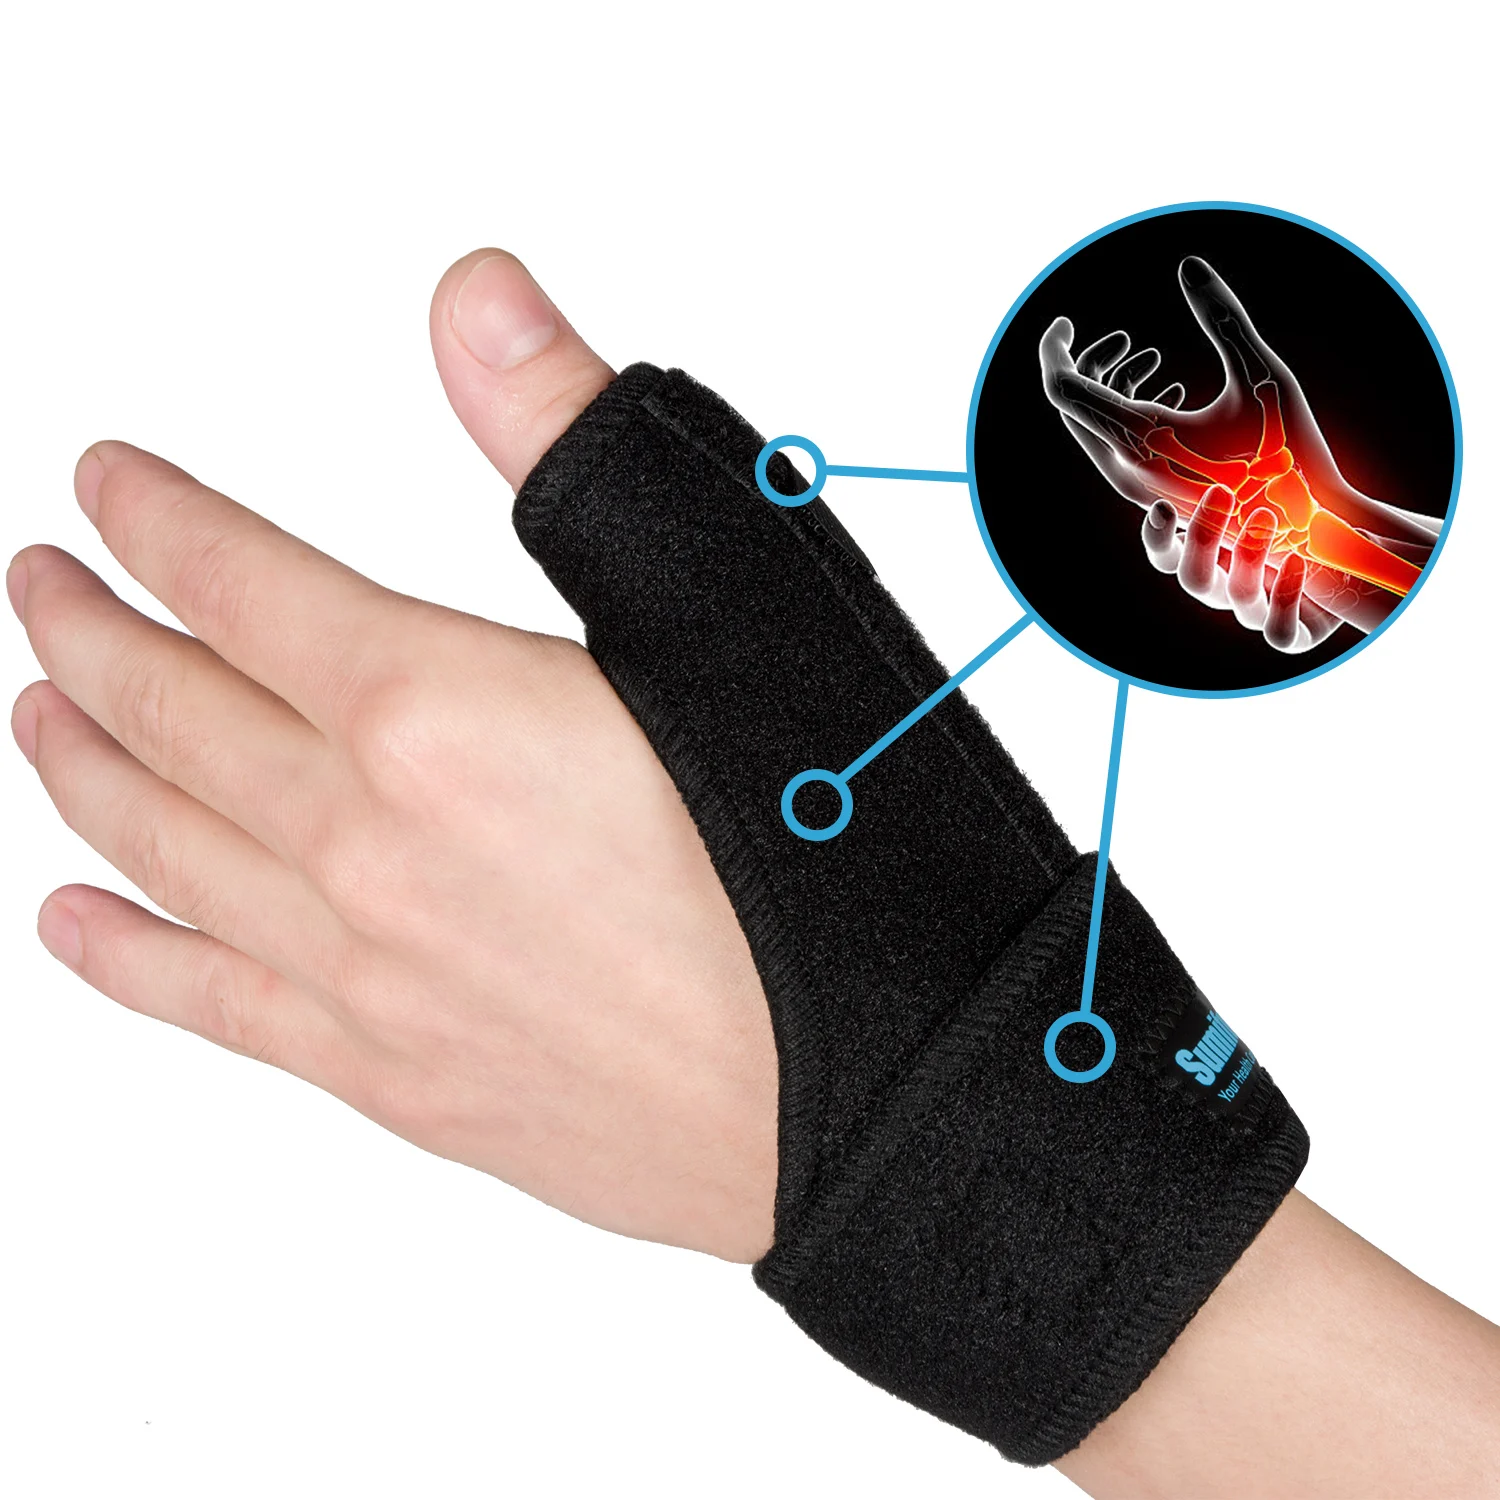 1pcs Hand Protecor Thumb Spica Wrist Brace Splint Support for Arthritis Tendonitis Carpal Tunnel Pain Relief C1572 electric usb warmer graphene heating winter hand feet warmer rechargeable heat warm pad therapy pain relief new year gift